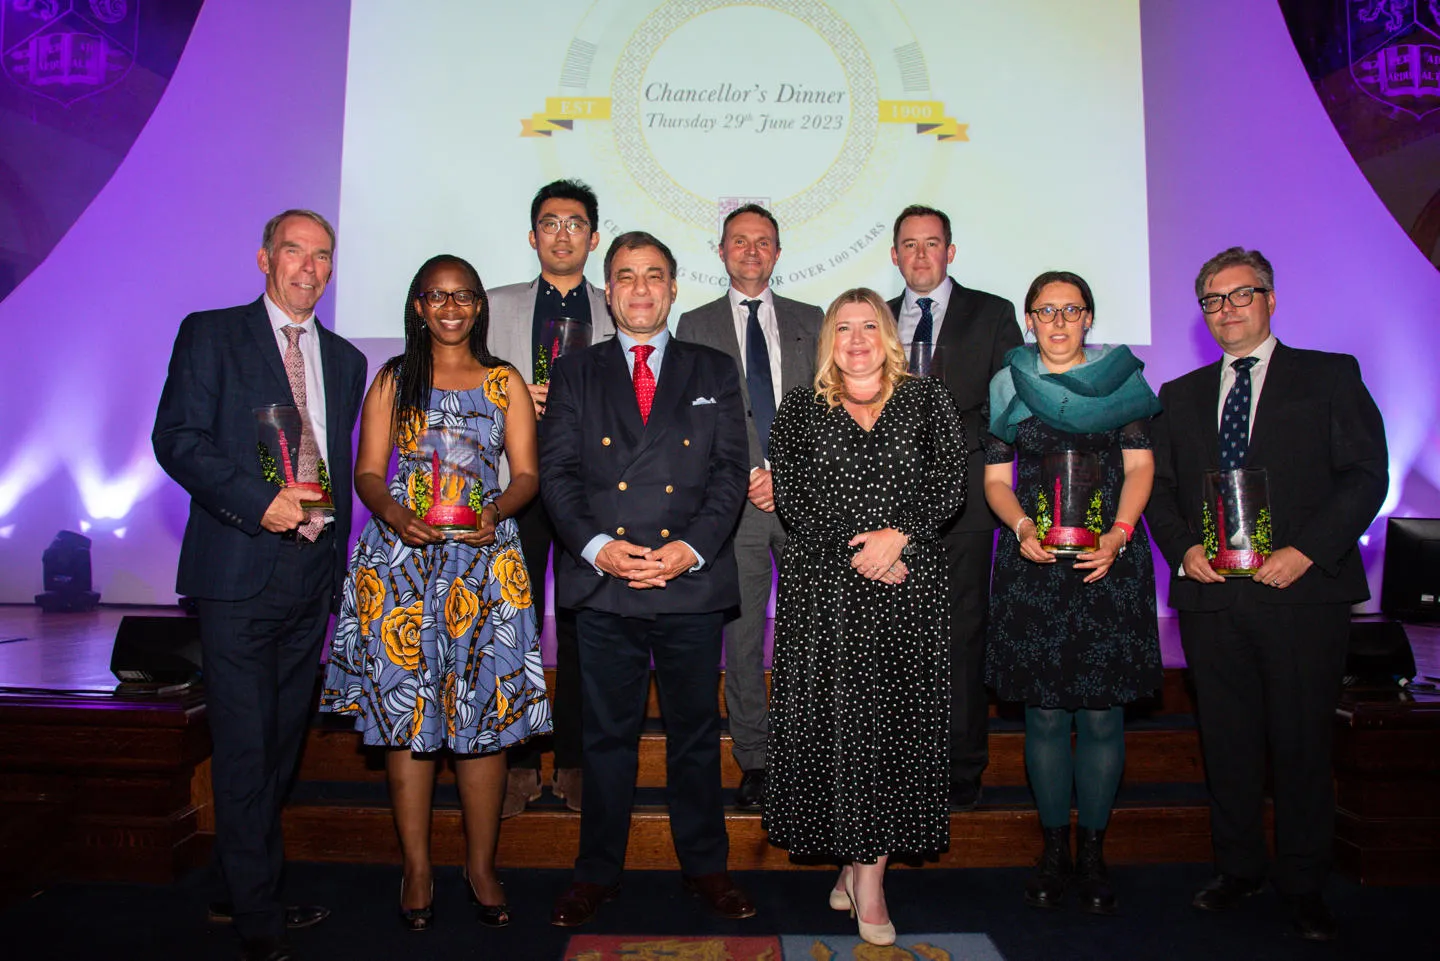 Photo of the Founders' Awards winners and leading figures from the University of Birmingham